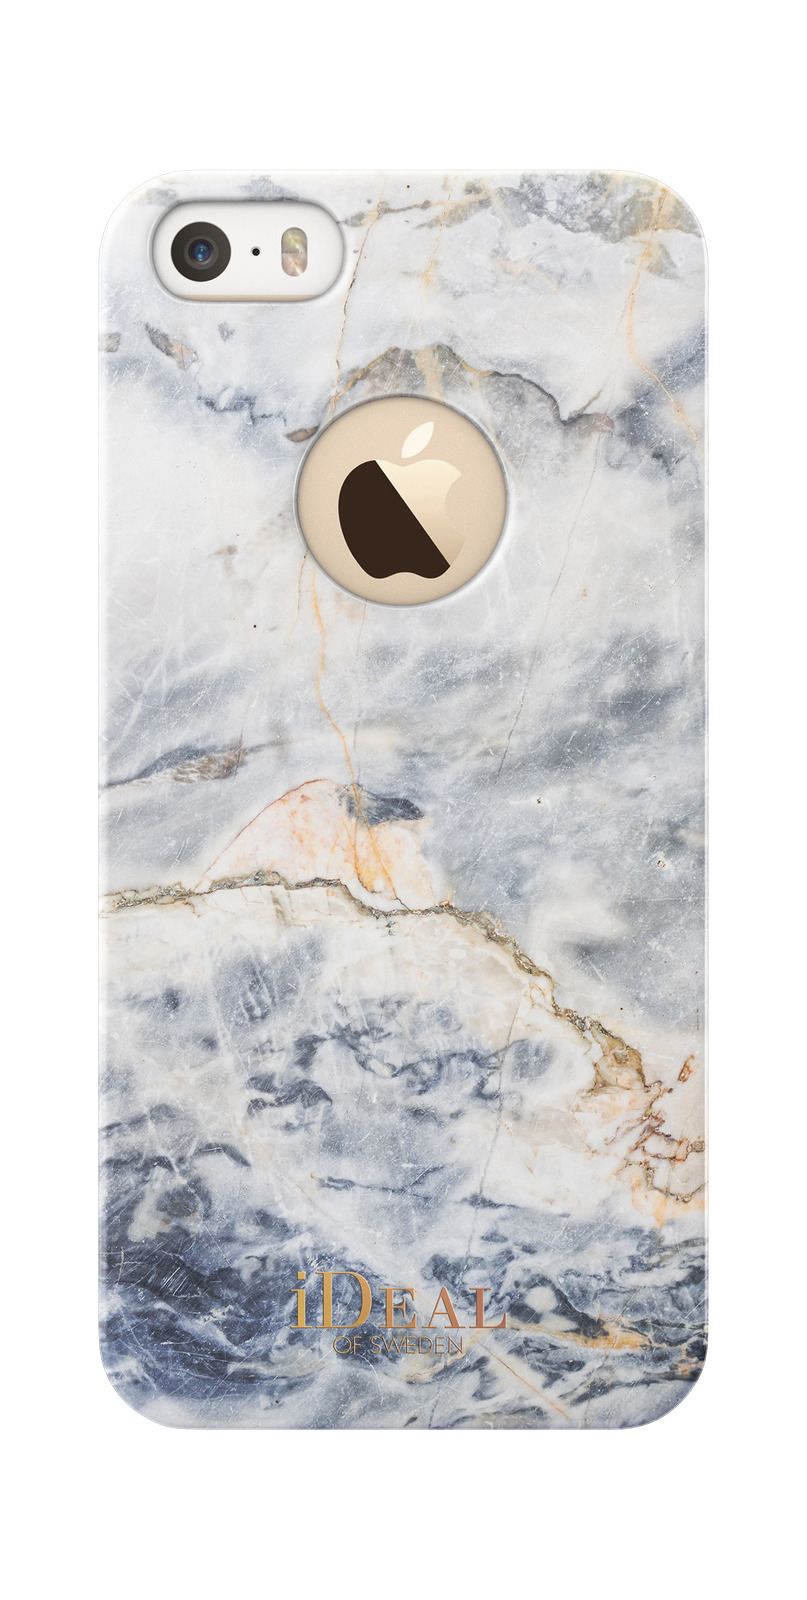 OF Ocean Backcover, IDEAL (2016), SWEDEN Fashion, SE Marble Apple, iPhone